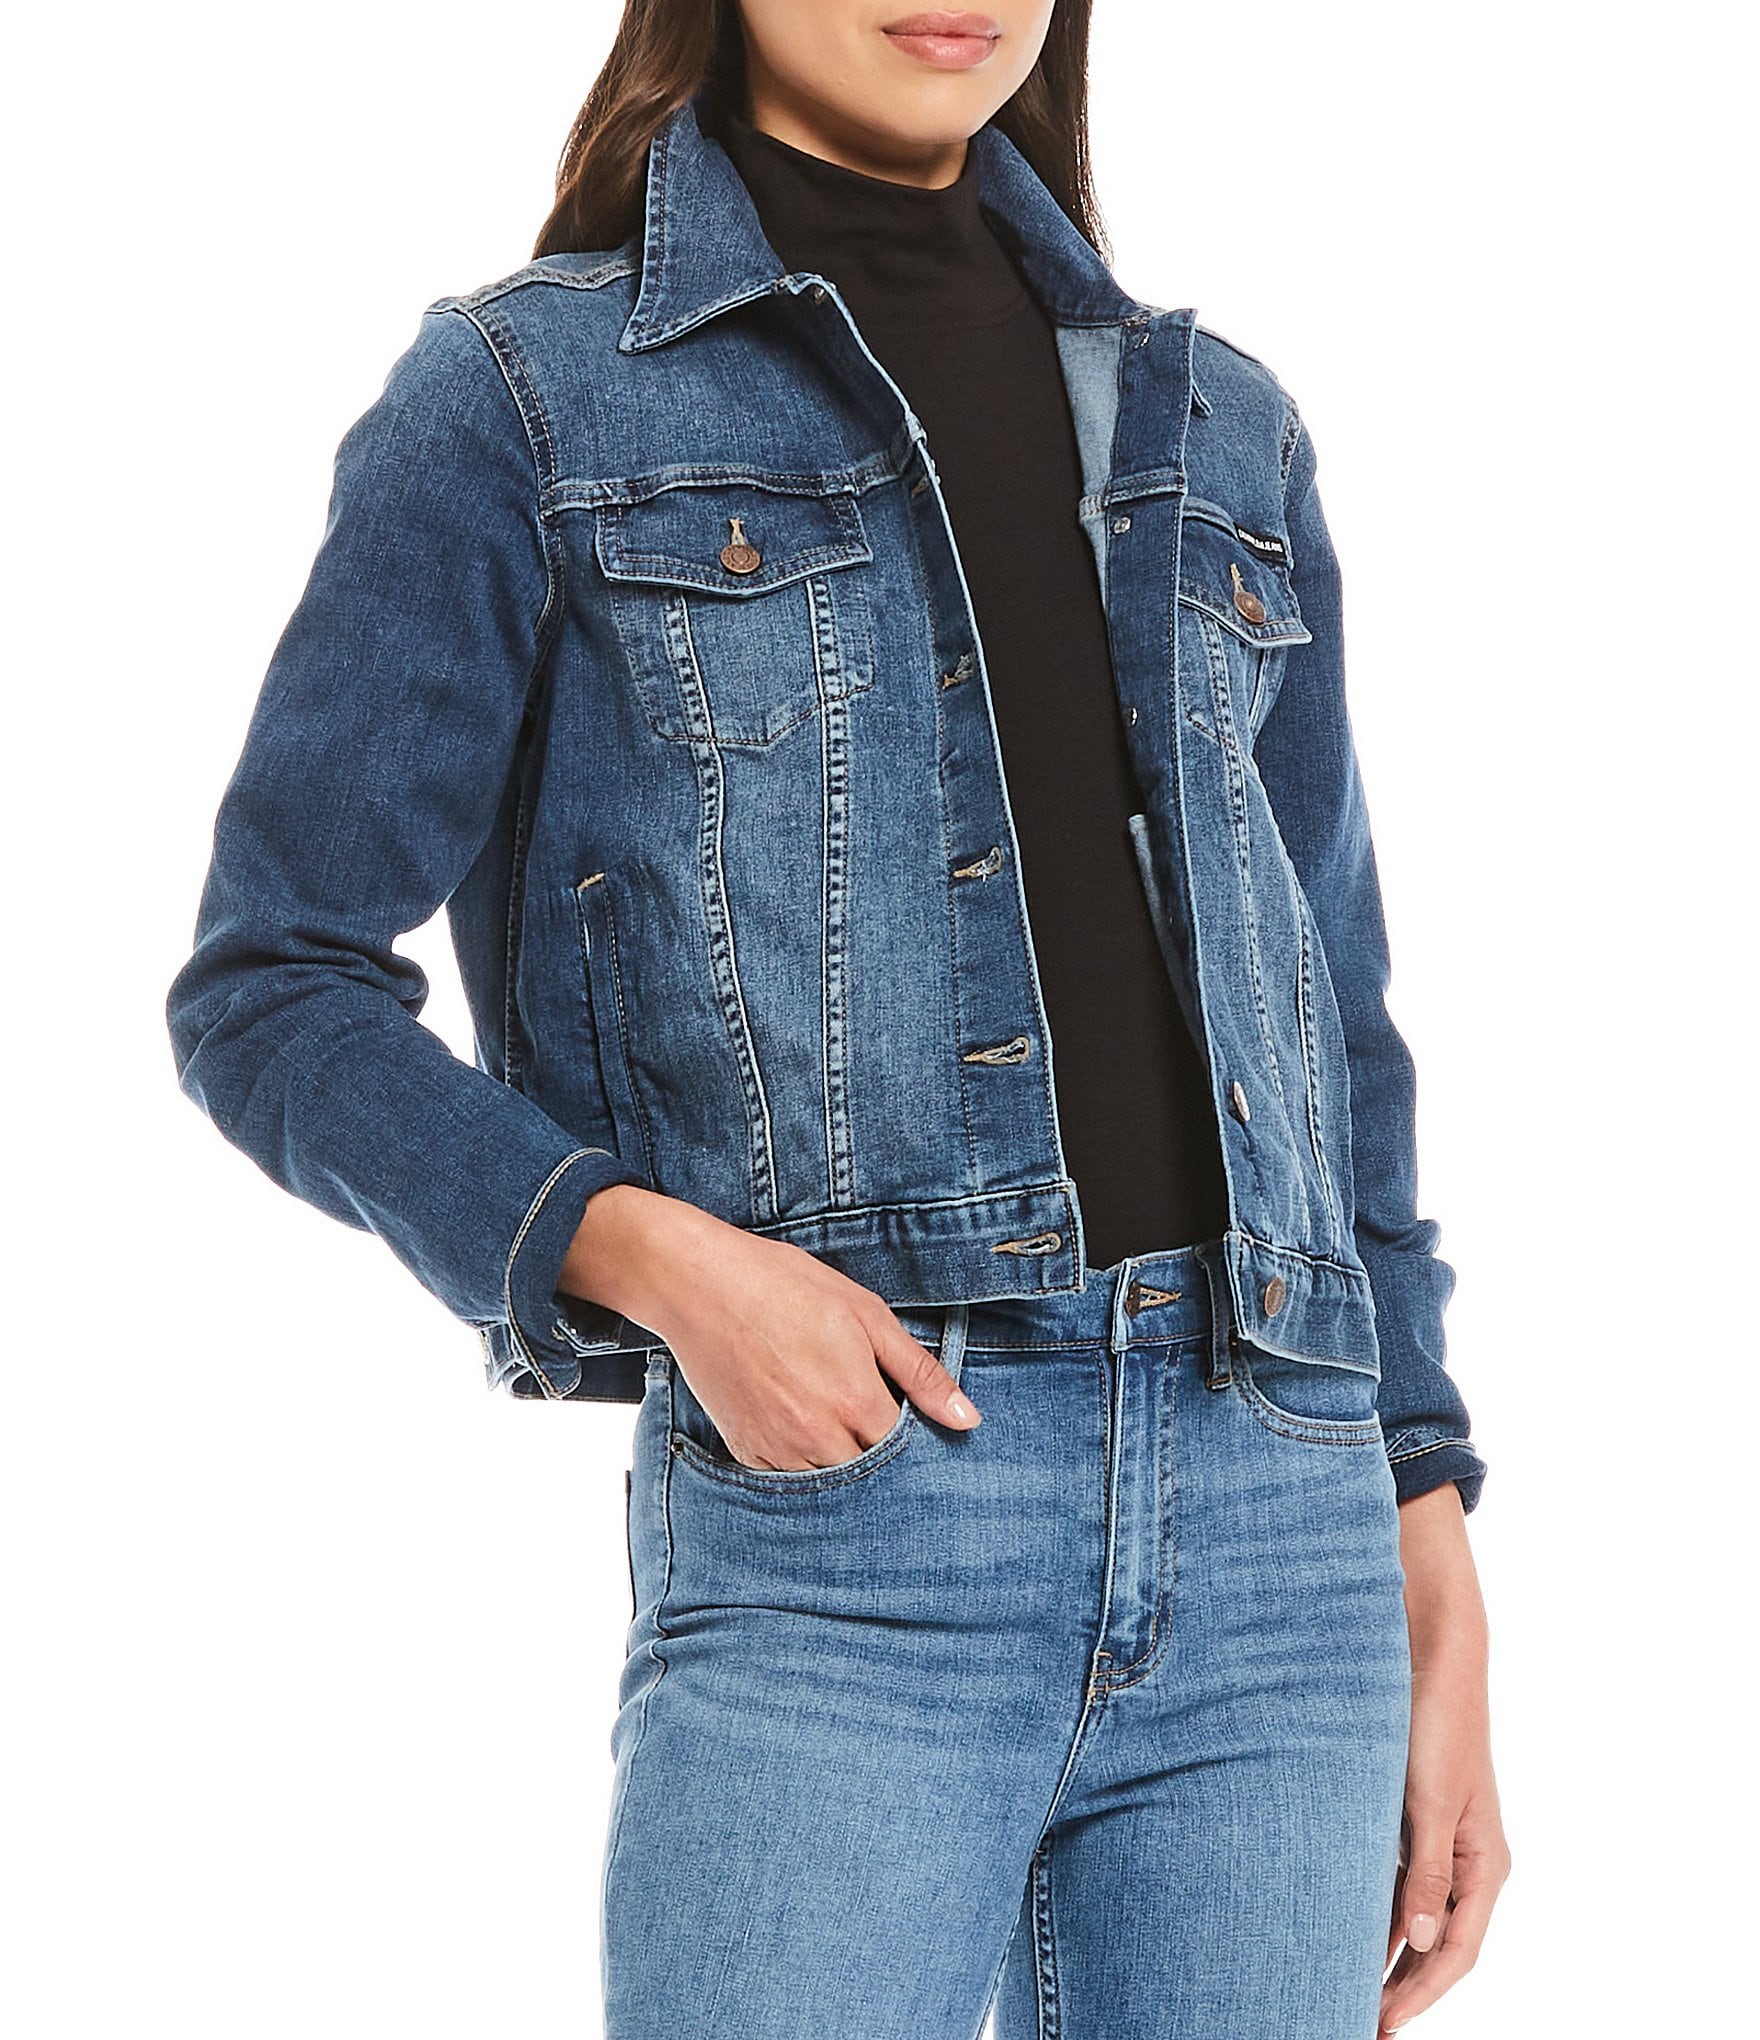 Calvin Klein Jeans denim jacket with logo and cut and sew | ASOS